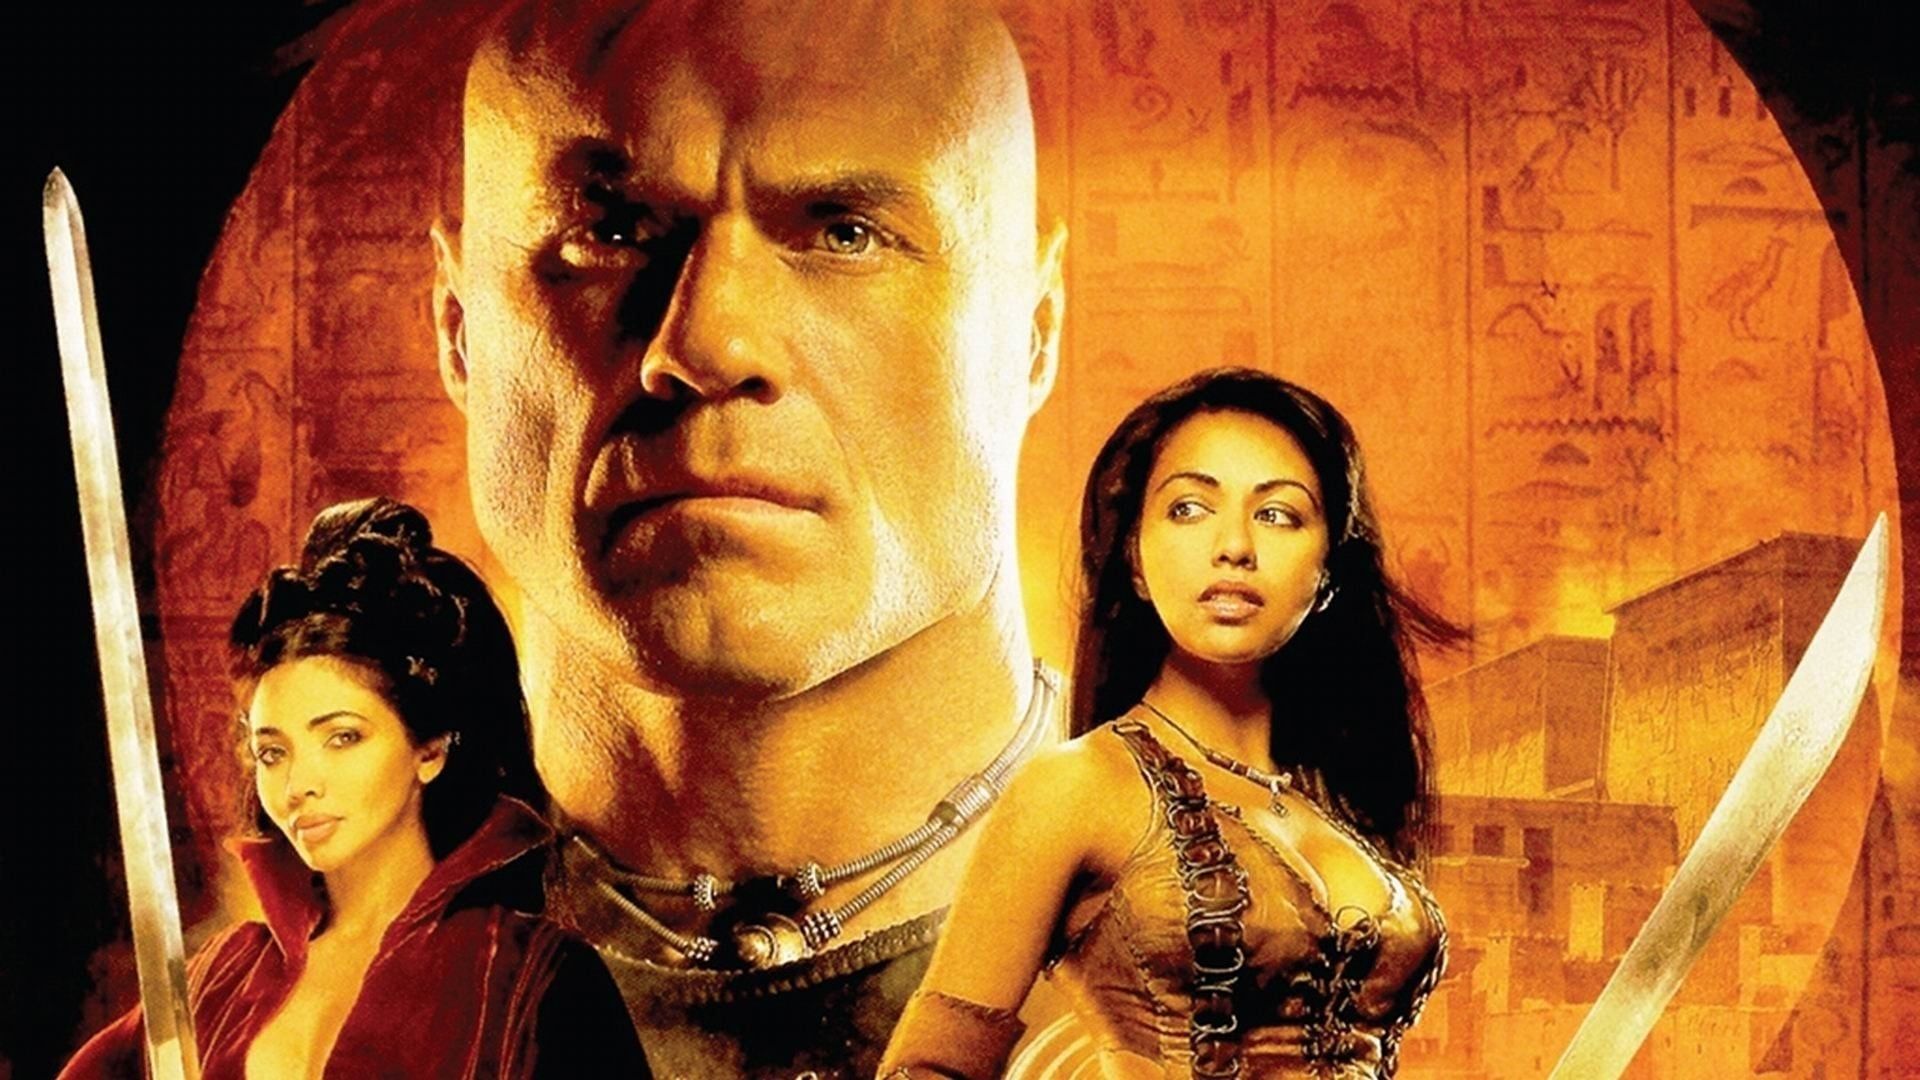 The Scorpion King 2: Rise of a Warrior Backdrop